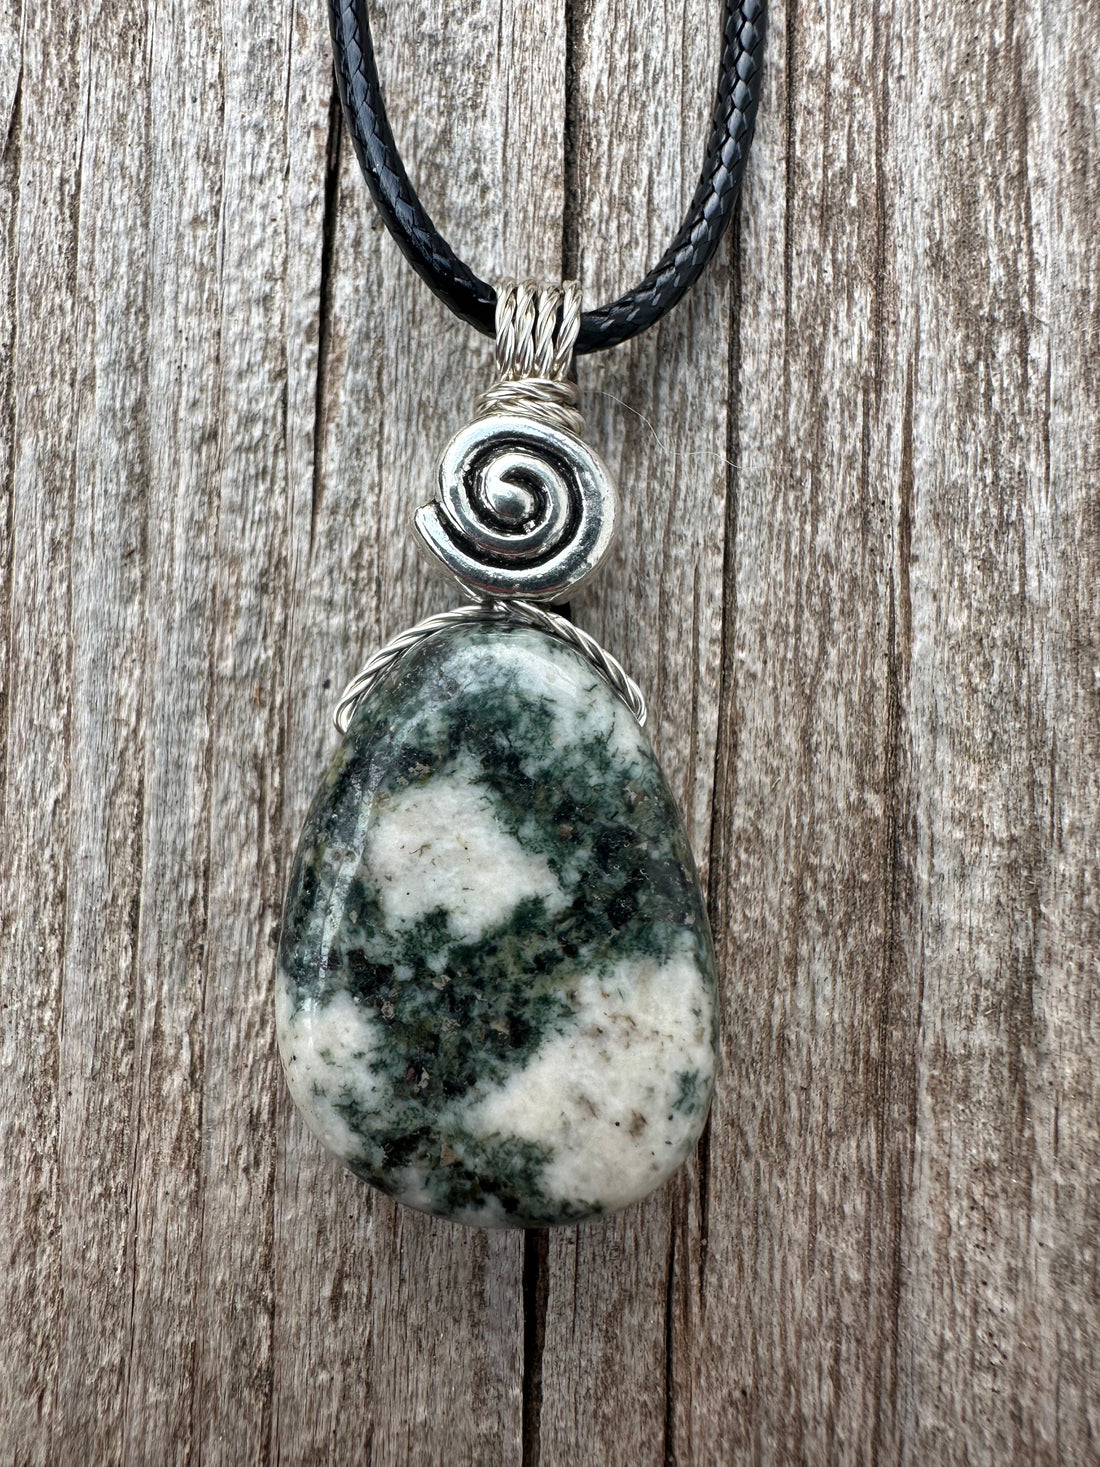 Preseli Bluestone Necklace for Protection & Psychic Growth. Spiral to Signify Consciousness.